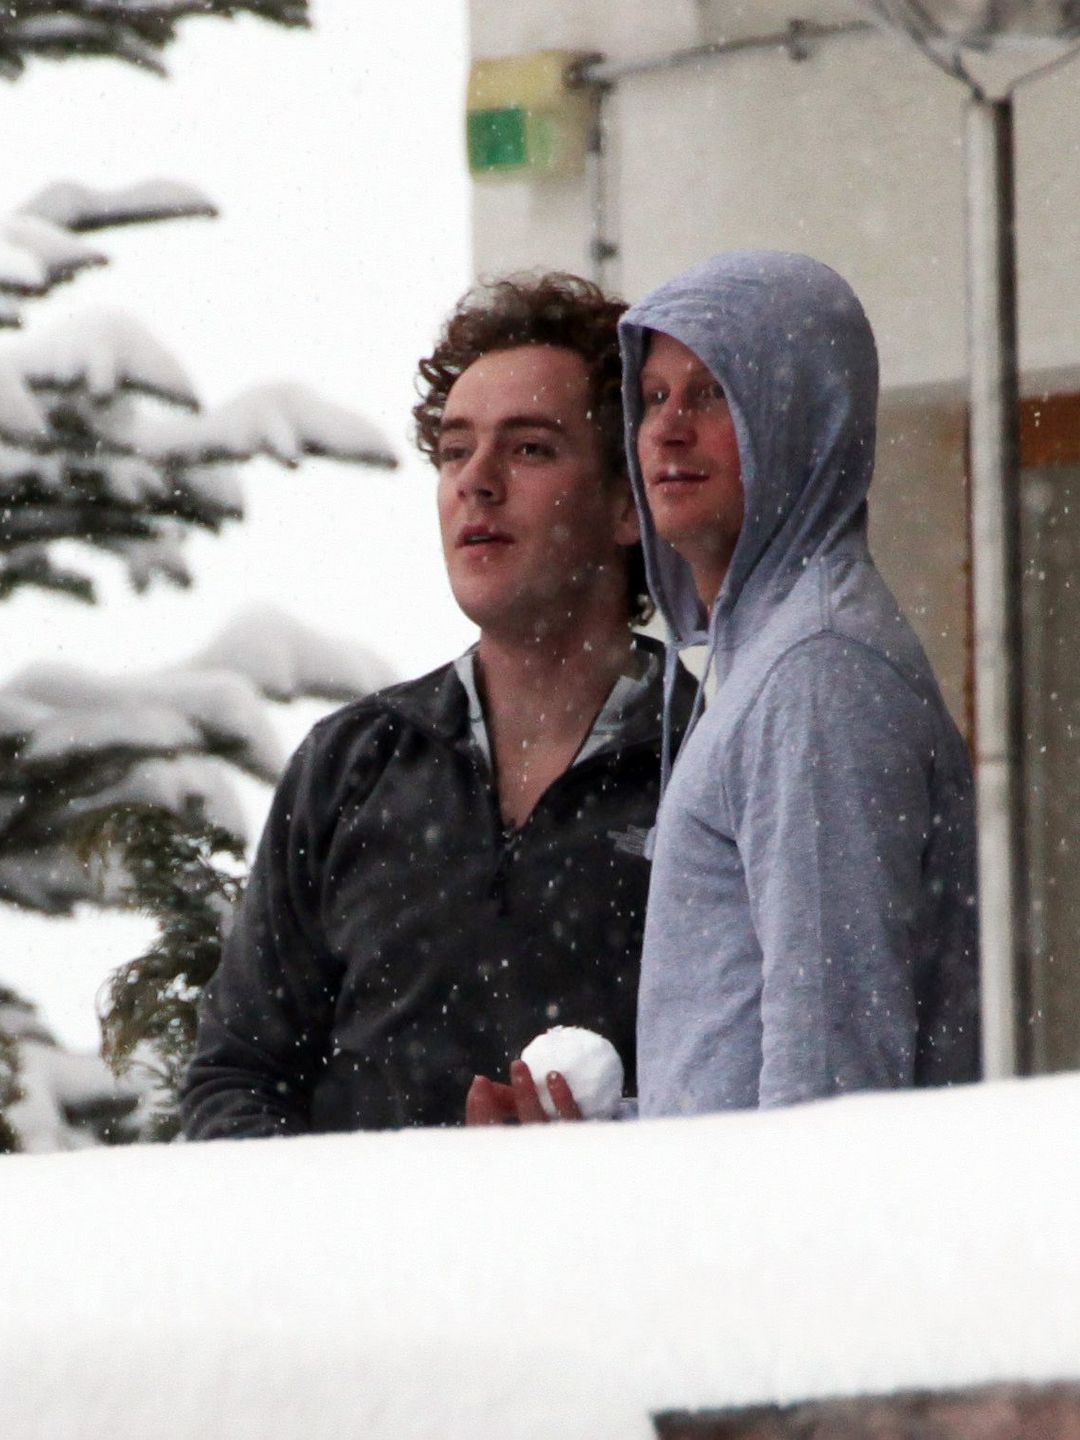 Tom Inskip and Prince Harry throwing snowballs